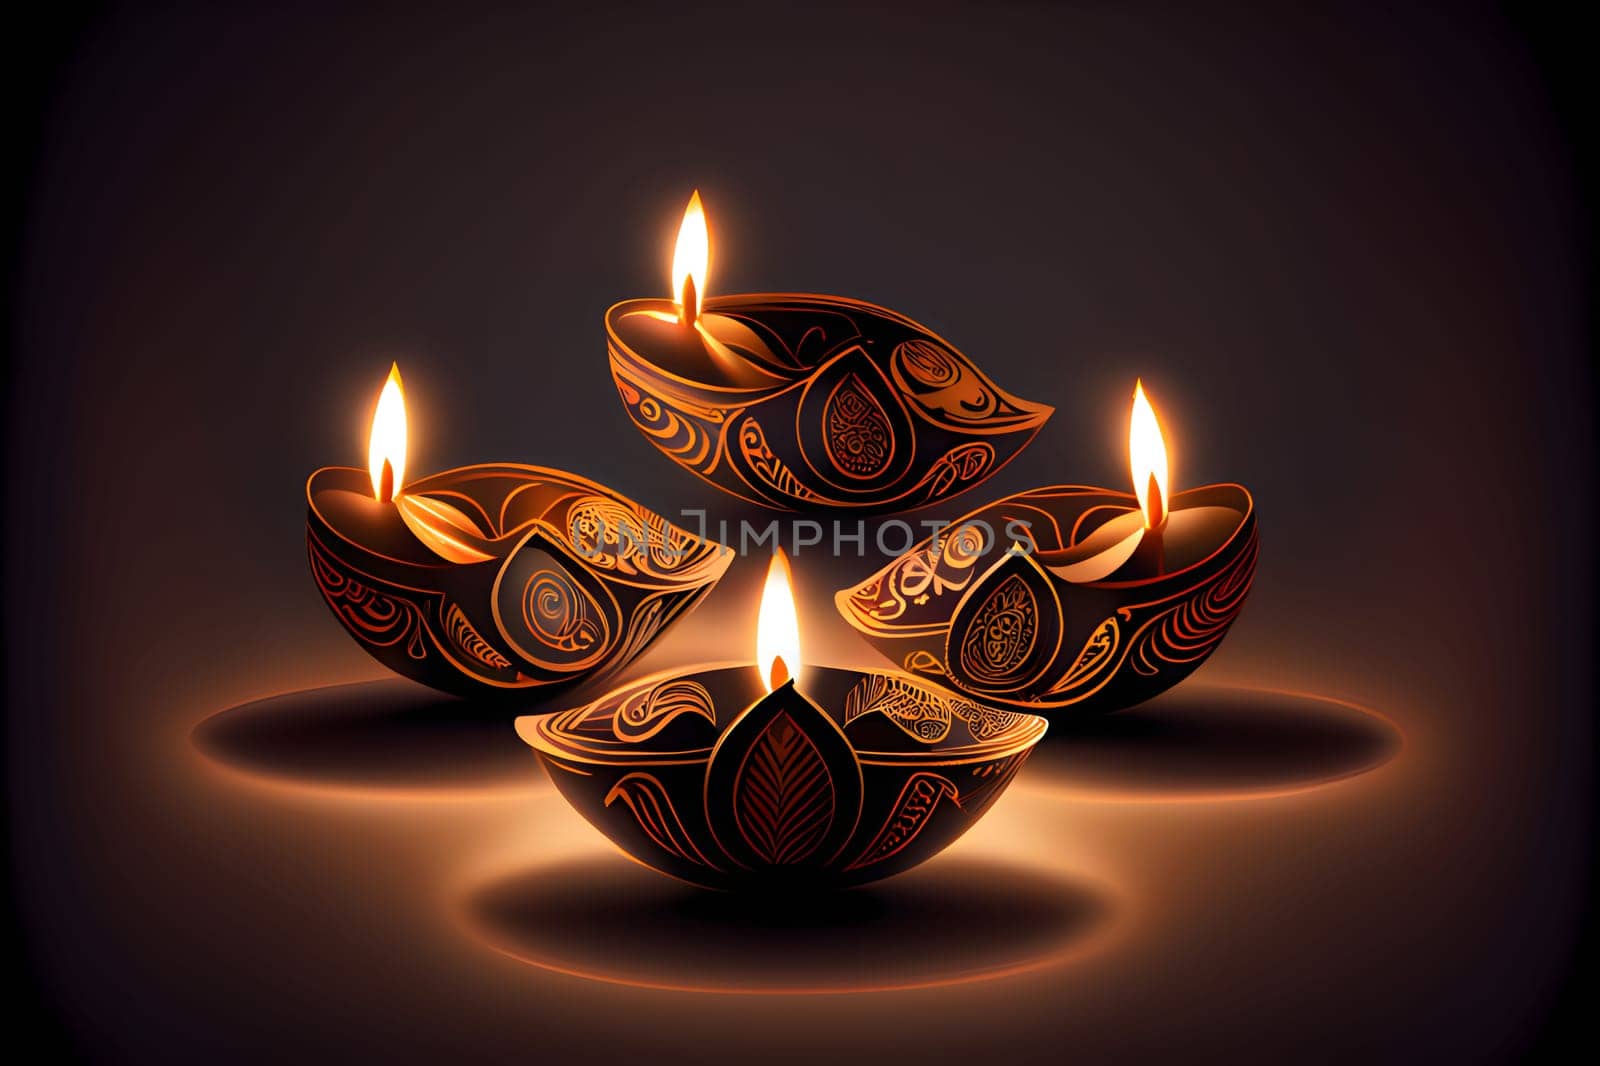 Four colorful candles with decorated patterns on a dark background. Diwali, the dipawali Indian festival of light. An atmosphere of joy and celebration.